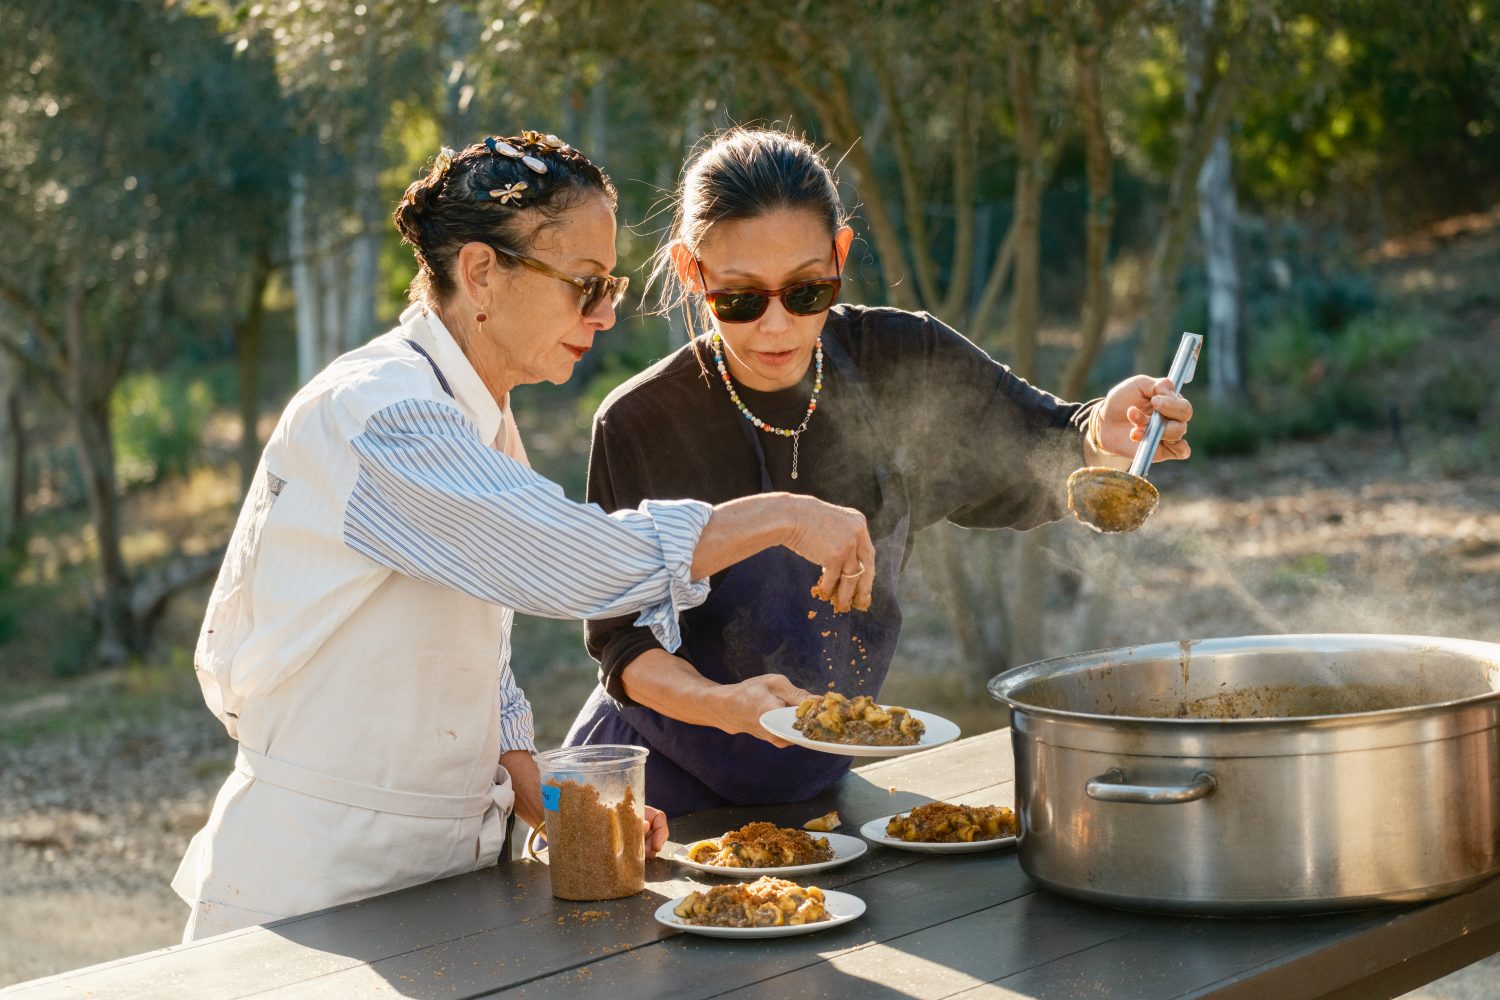 two women with sunglasses serving food onto plates from a steaming pot